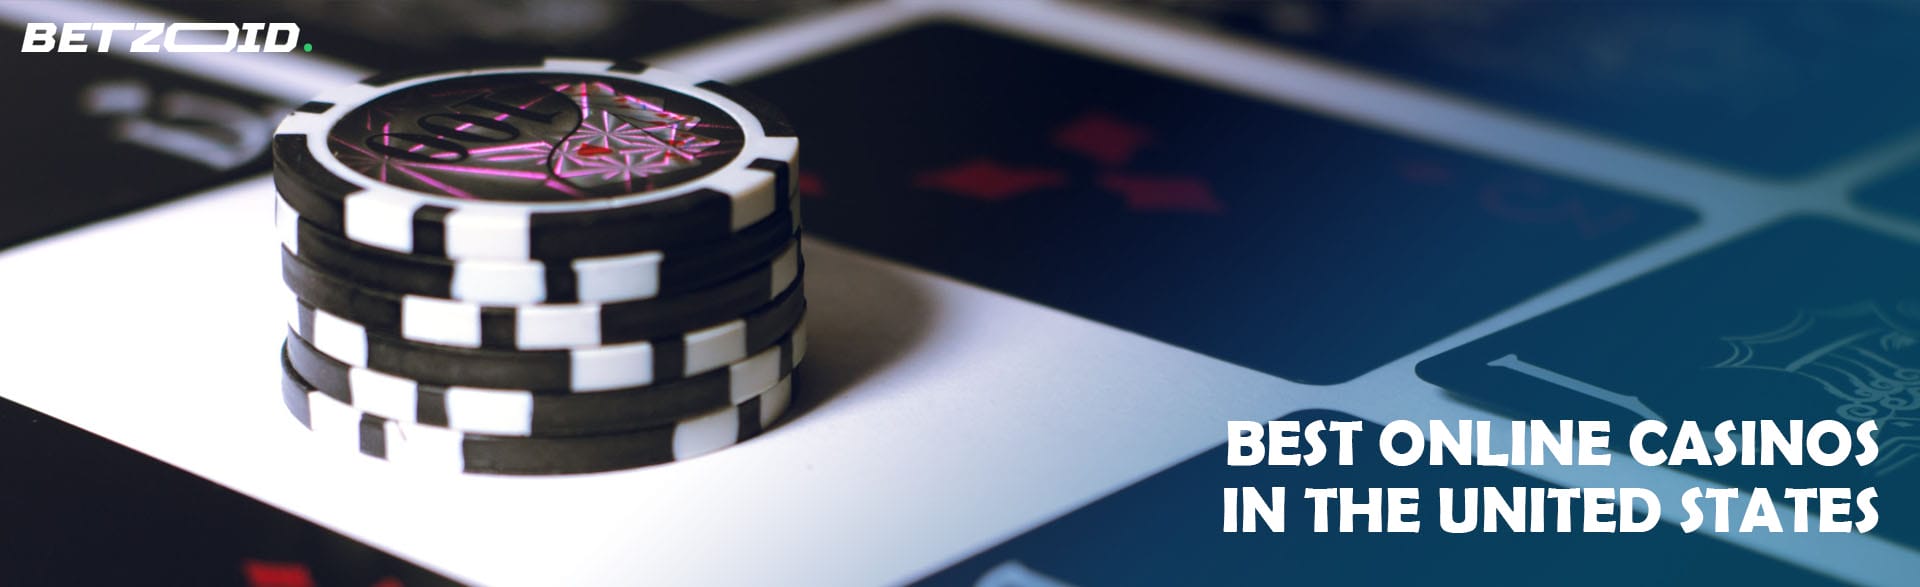 Best Online Casinos in the United States.